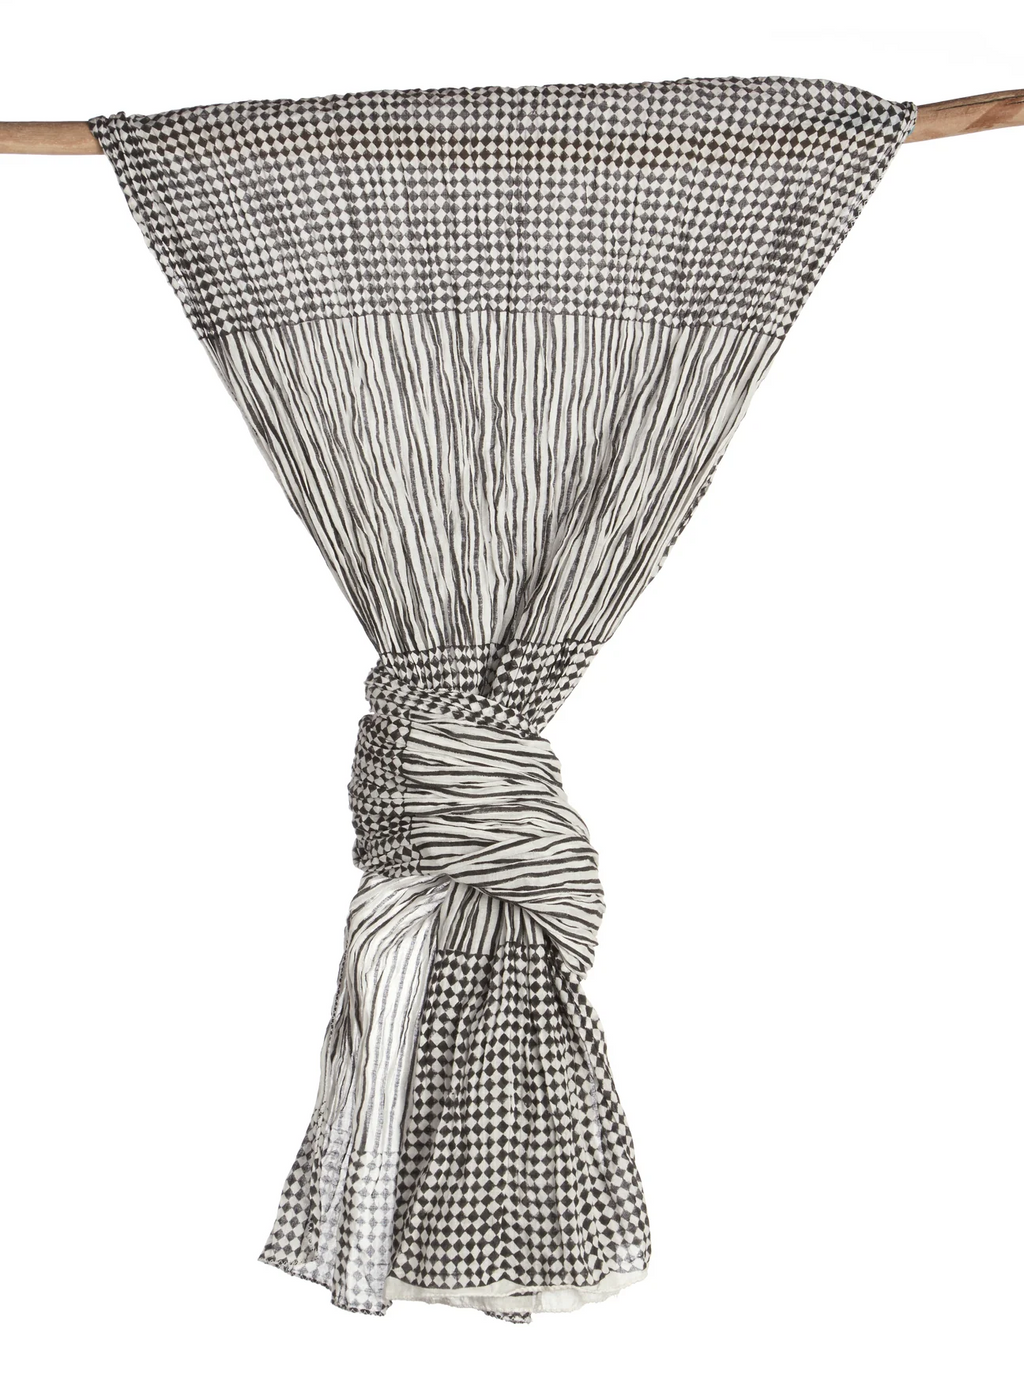 A black and white patterned scarf is draped over a wooden stick and tied near the edge. The pattern contains segments of checkers and vertical stripes. 